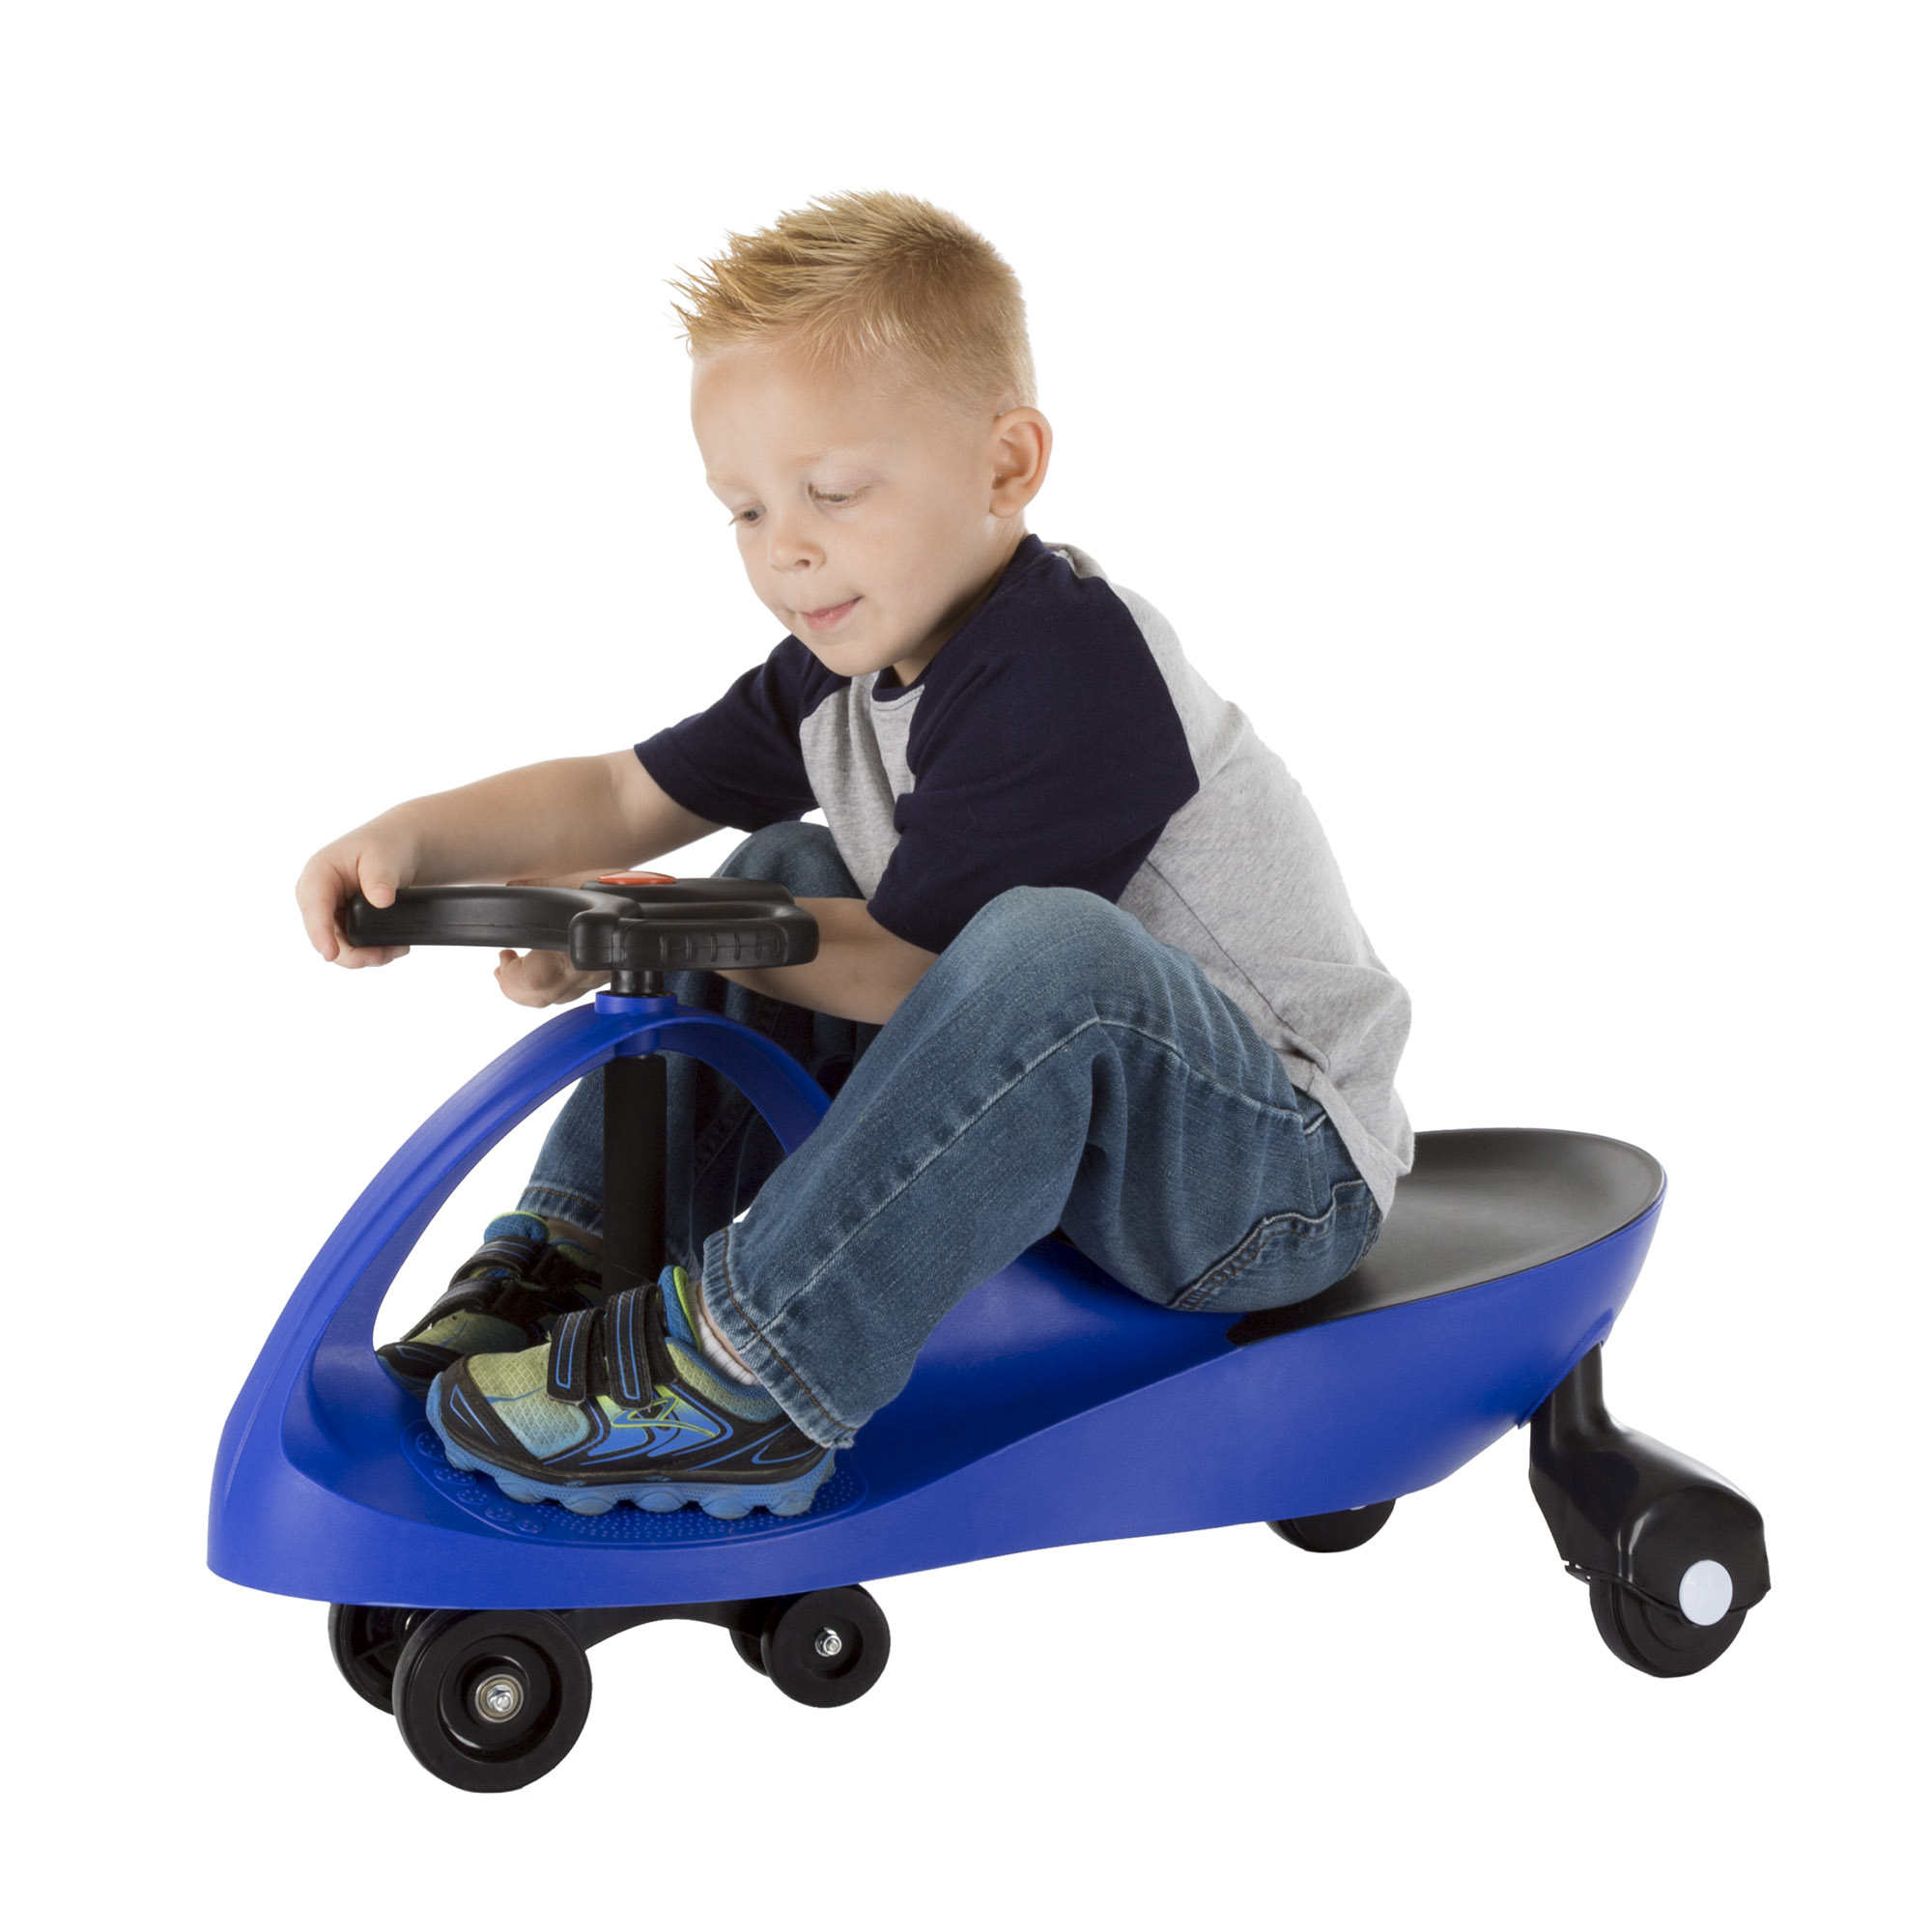 Ride On Toy ZigZag Twistcar Wiggle No Batteries Kids Energy Operated Blue Kids Ages 2 - 6 Yrs